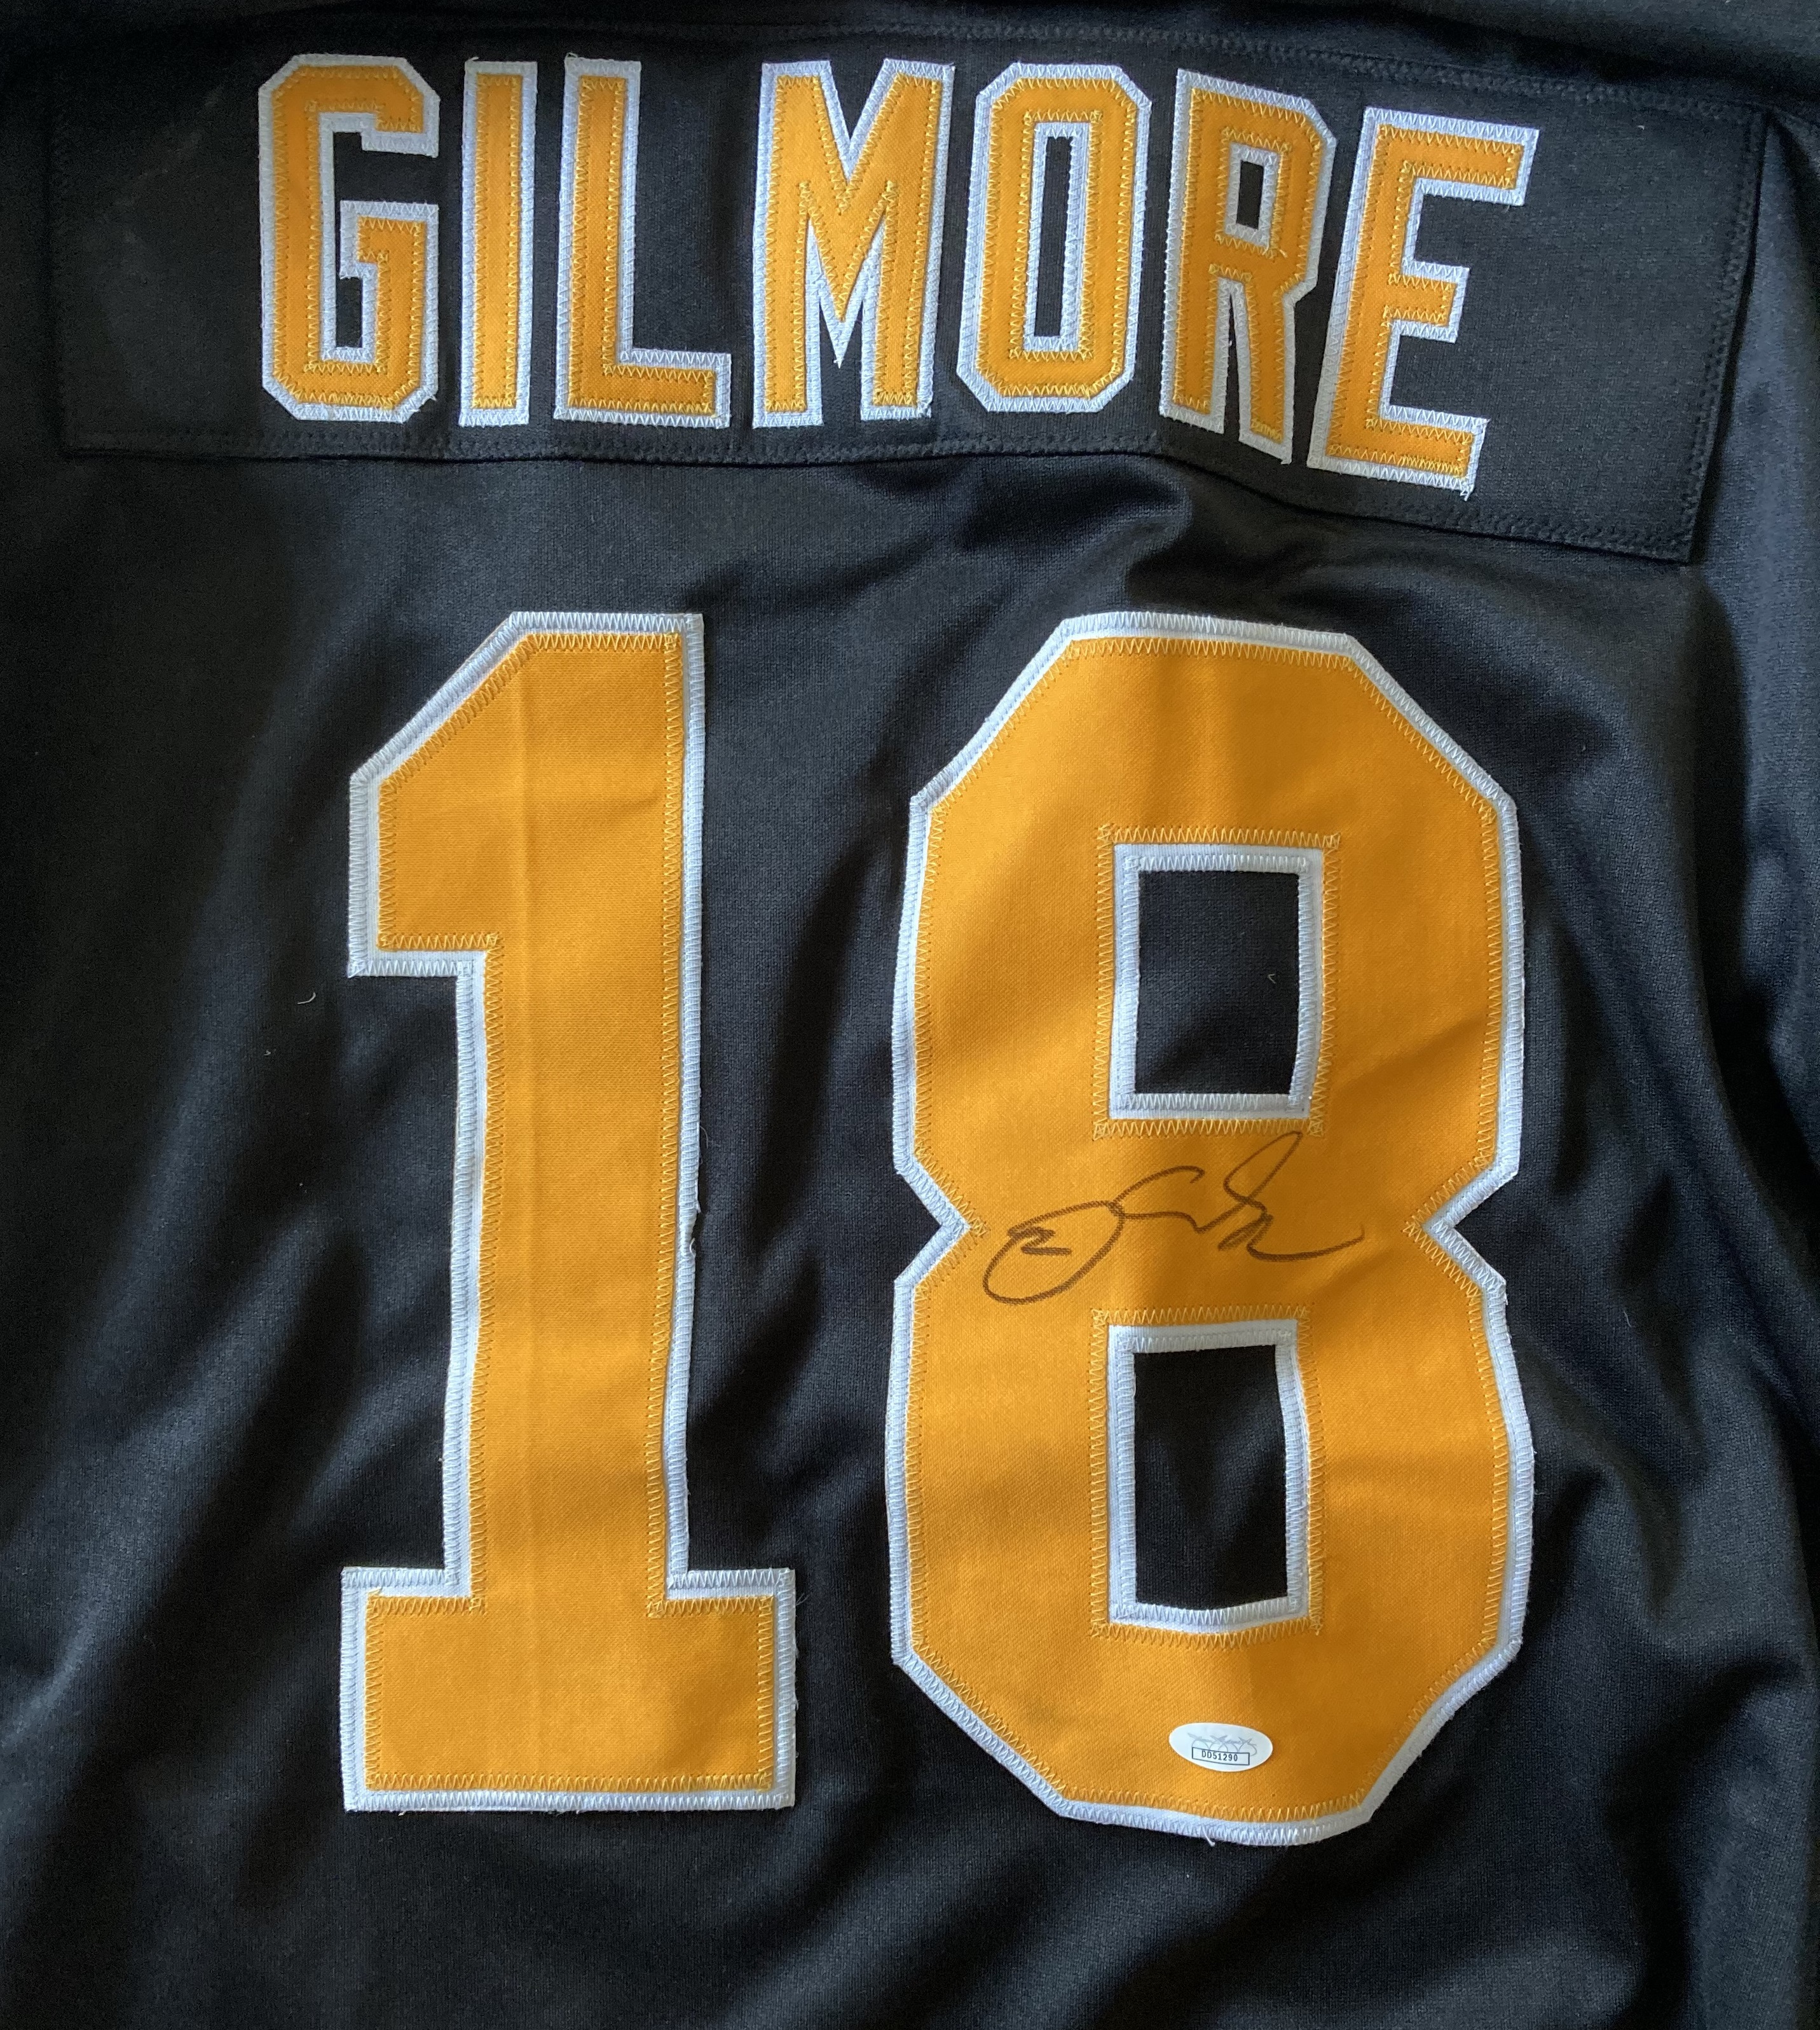 New ListingAdam Sandler SIGNED Happy Gilmore Jersey JSA Authenticated COA  XL Boston Bruins Opens in a new window or tab